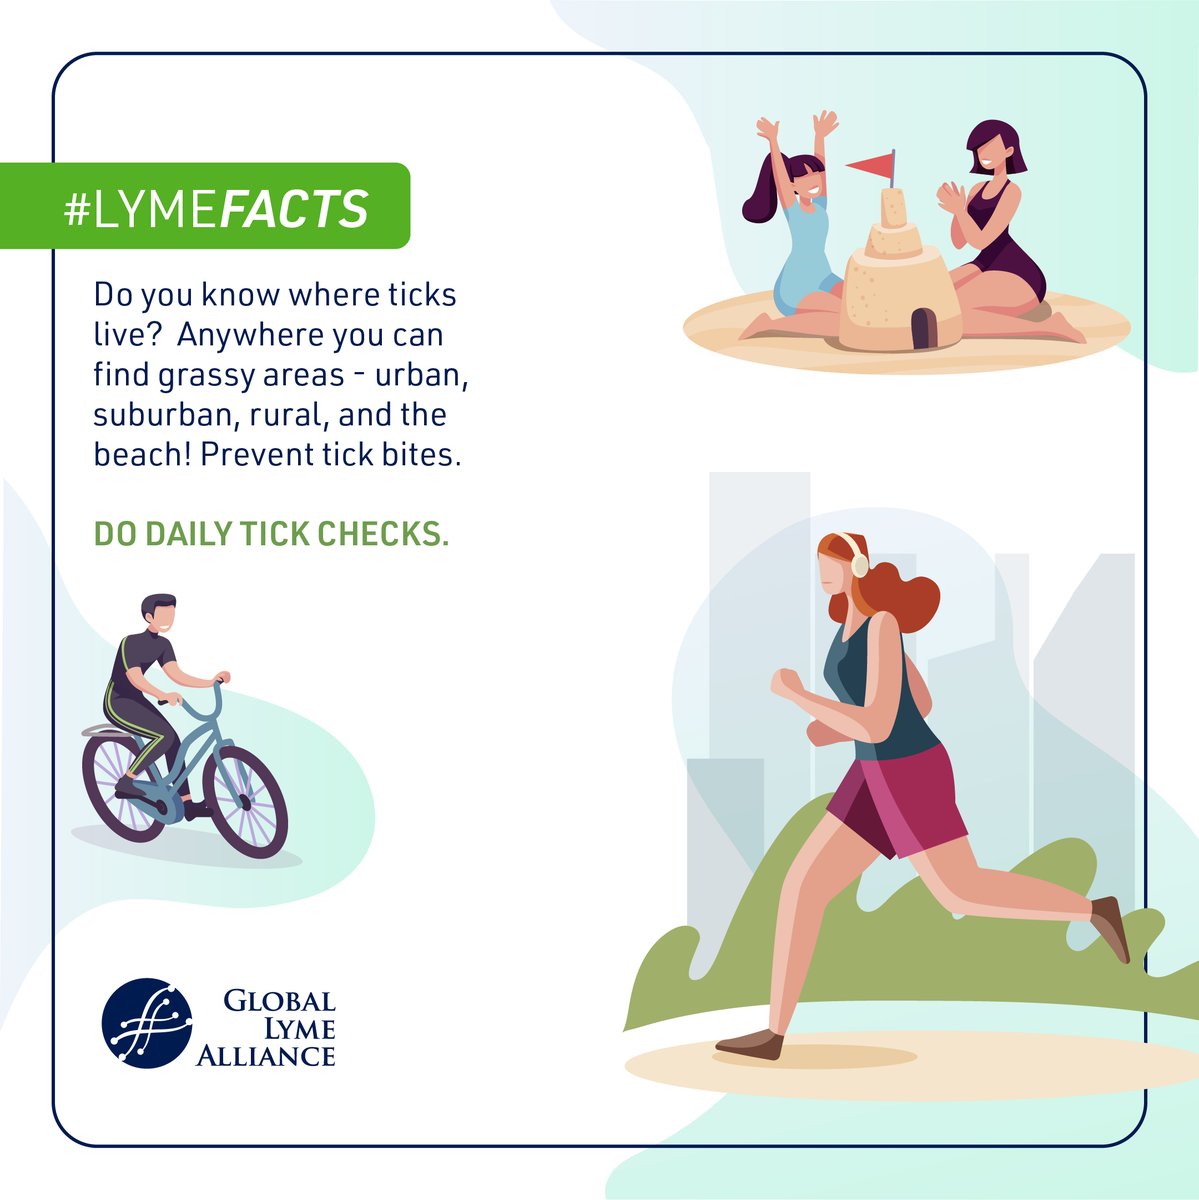 🌿🕷️ Did you know ticks are arachnids, not insects, and can transmit Lyme disease? As we head into peak tick season, remember to stay #TickAware! Visit our 'About Ticks & Lyme Disease' here: Visit our 'About Ticks & Lyme Disease' page here: hubs.la/Q02x5-Np0